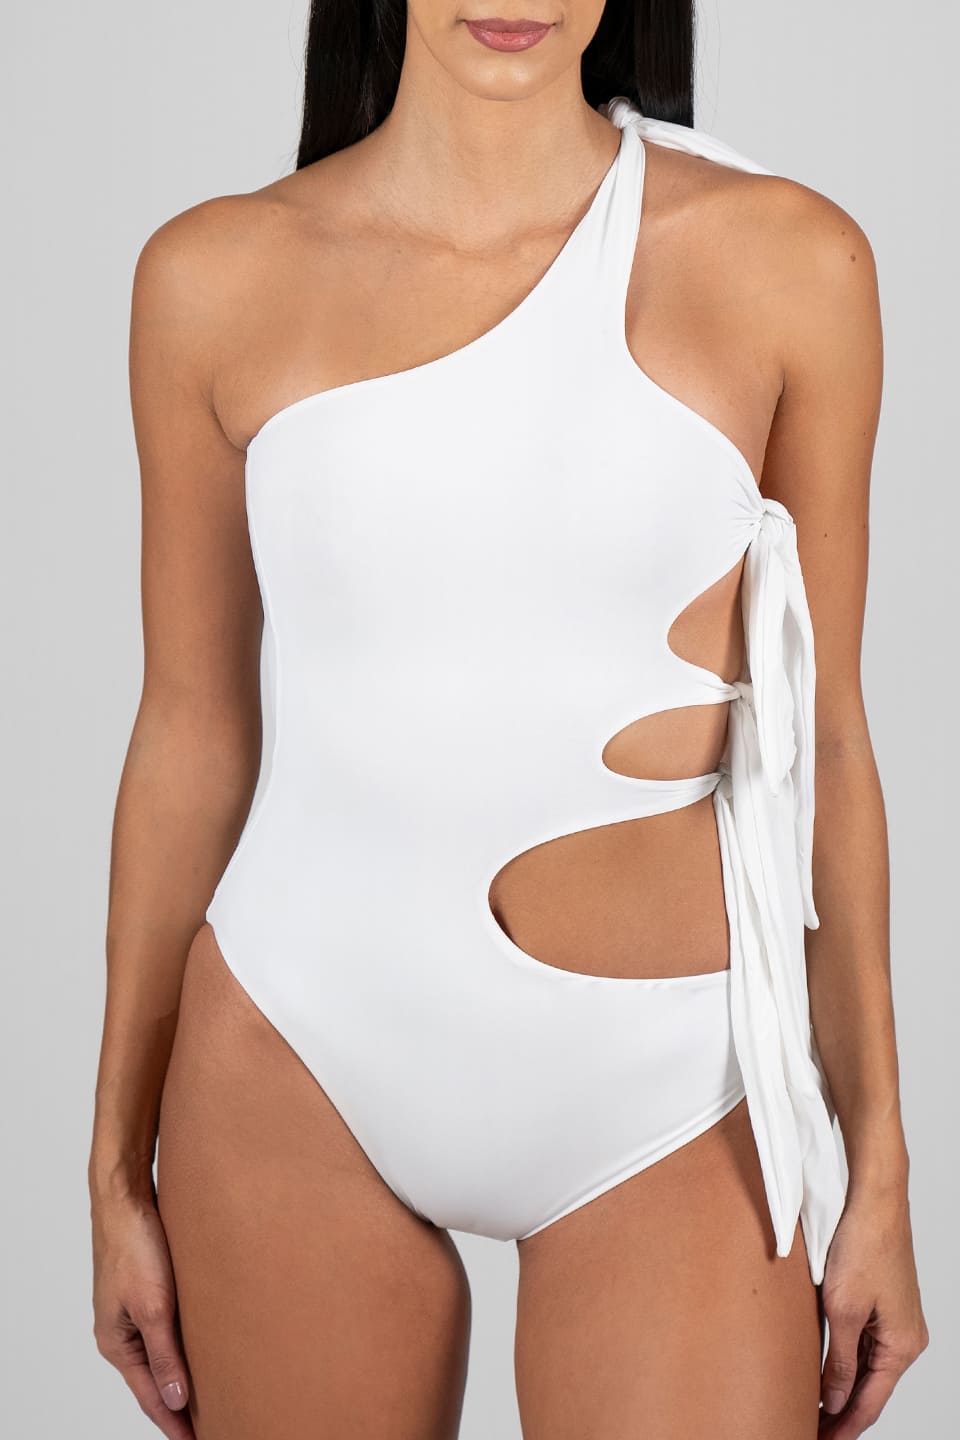 Thumbnail for Product gallery 1, Zina White Swimsuit